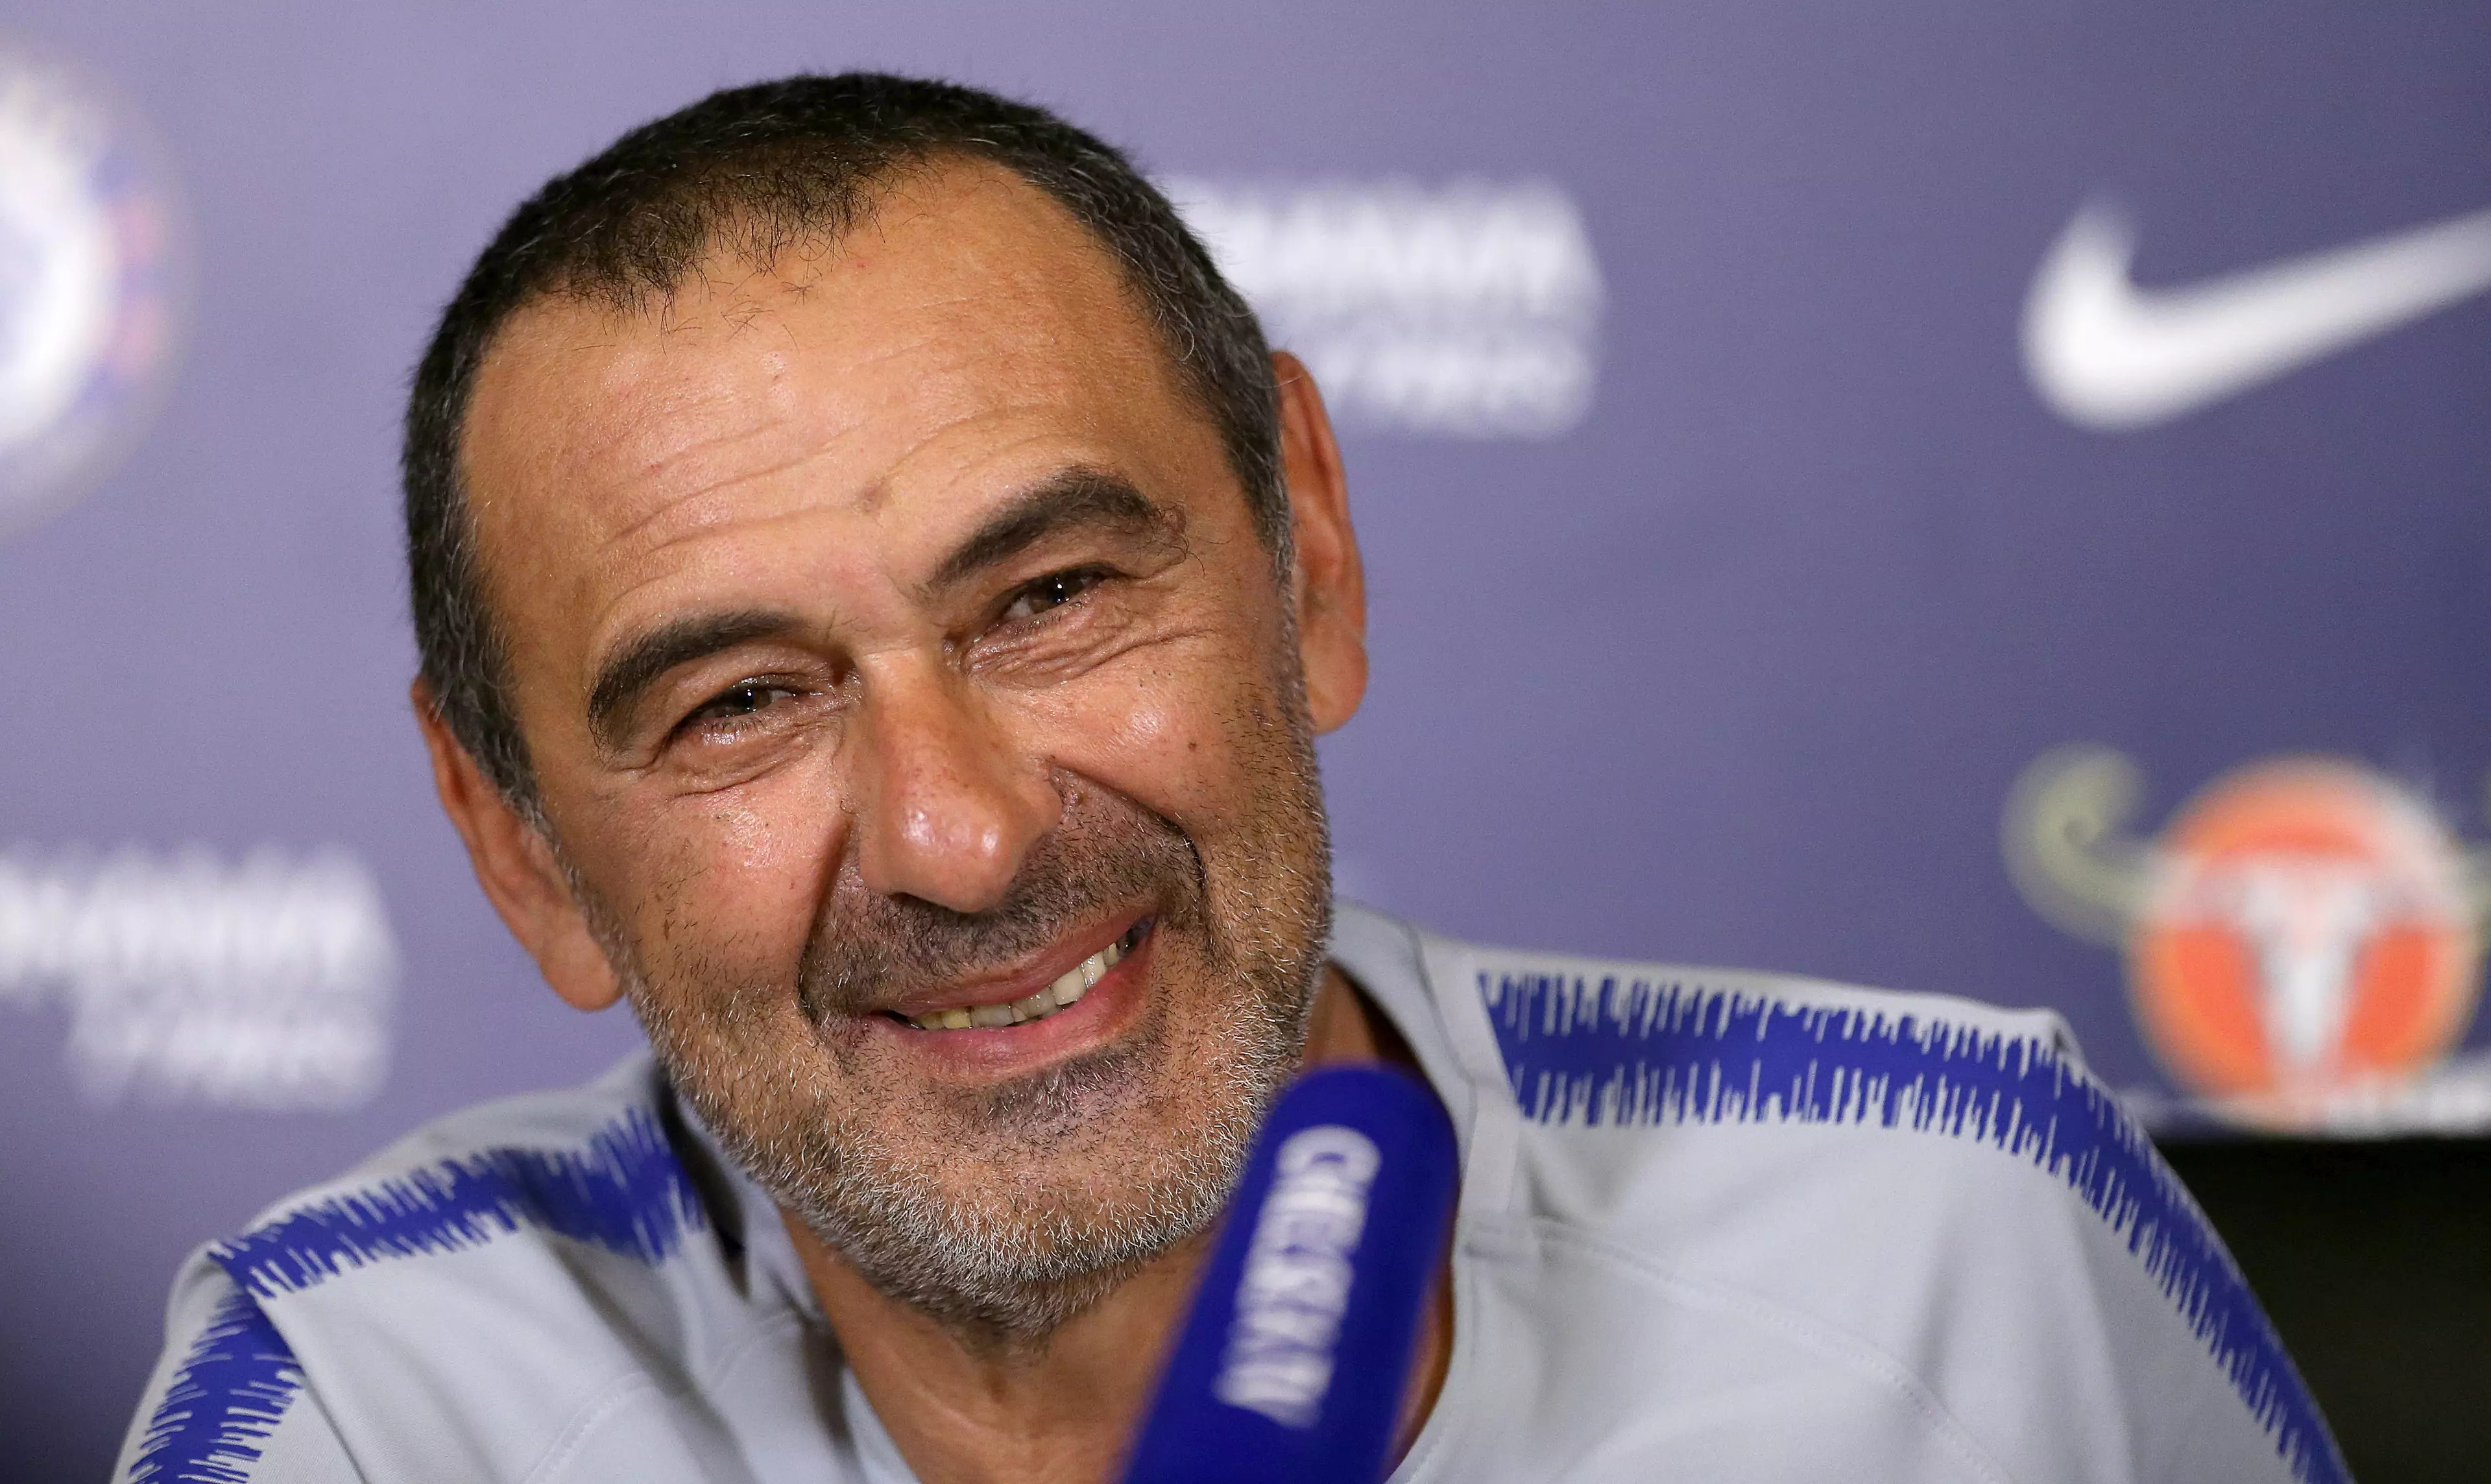 Sarri is the latest in a long line of Chelsea managers. Image: PA Images